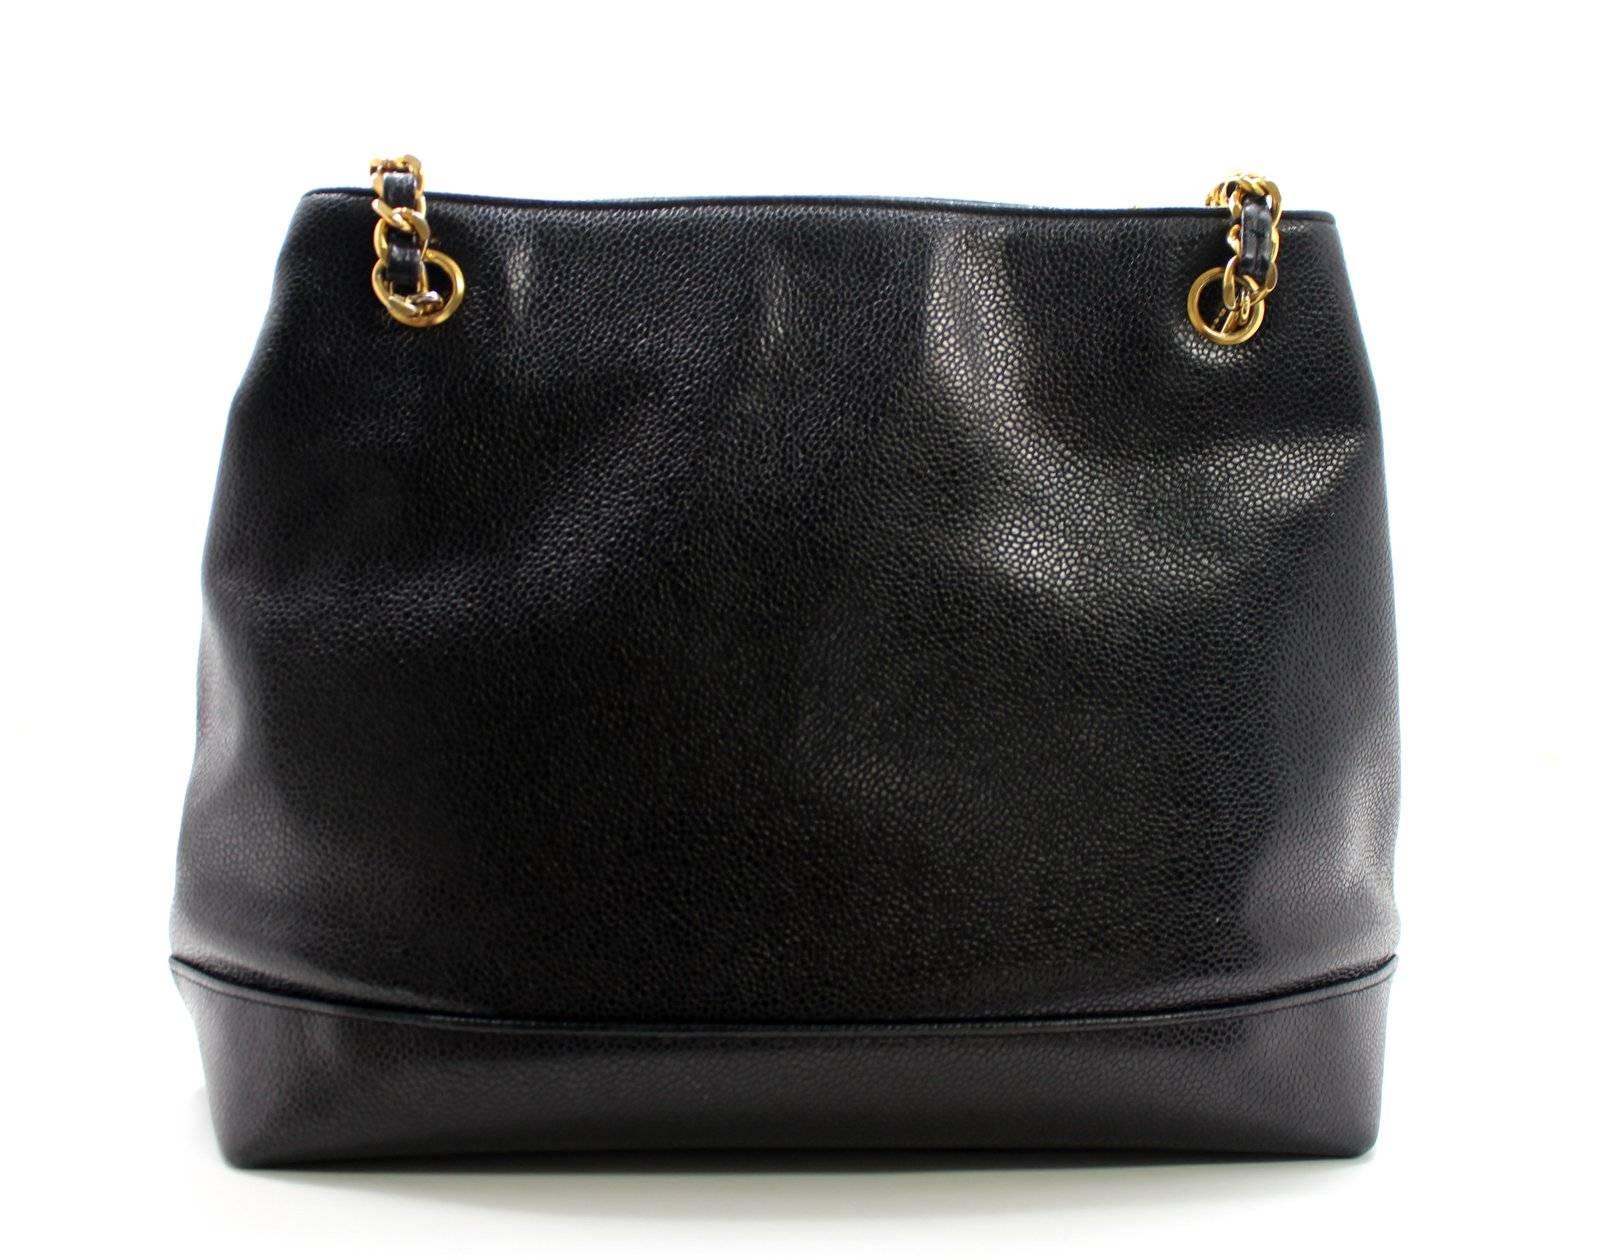 
Excellent PLUS- Chanel Black Caviar Shoulder Bag
A great find for a savvy shopper, this classic Chanel style is a brilliant addition to any collection.  Overall, better than excellent with light wear on the corners being only real signs of prior